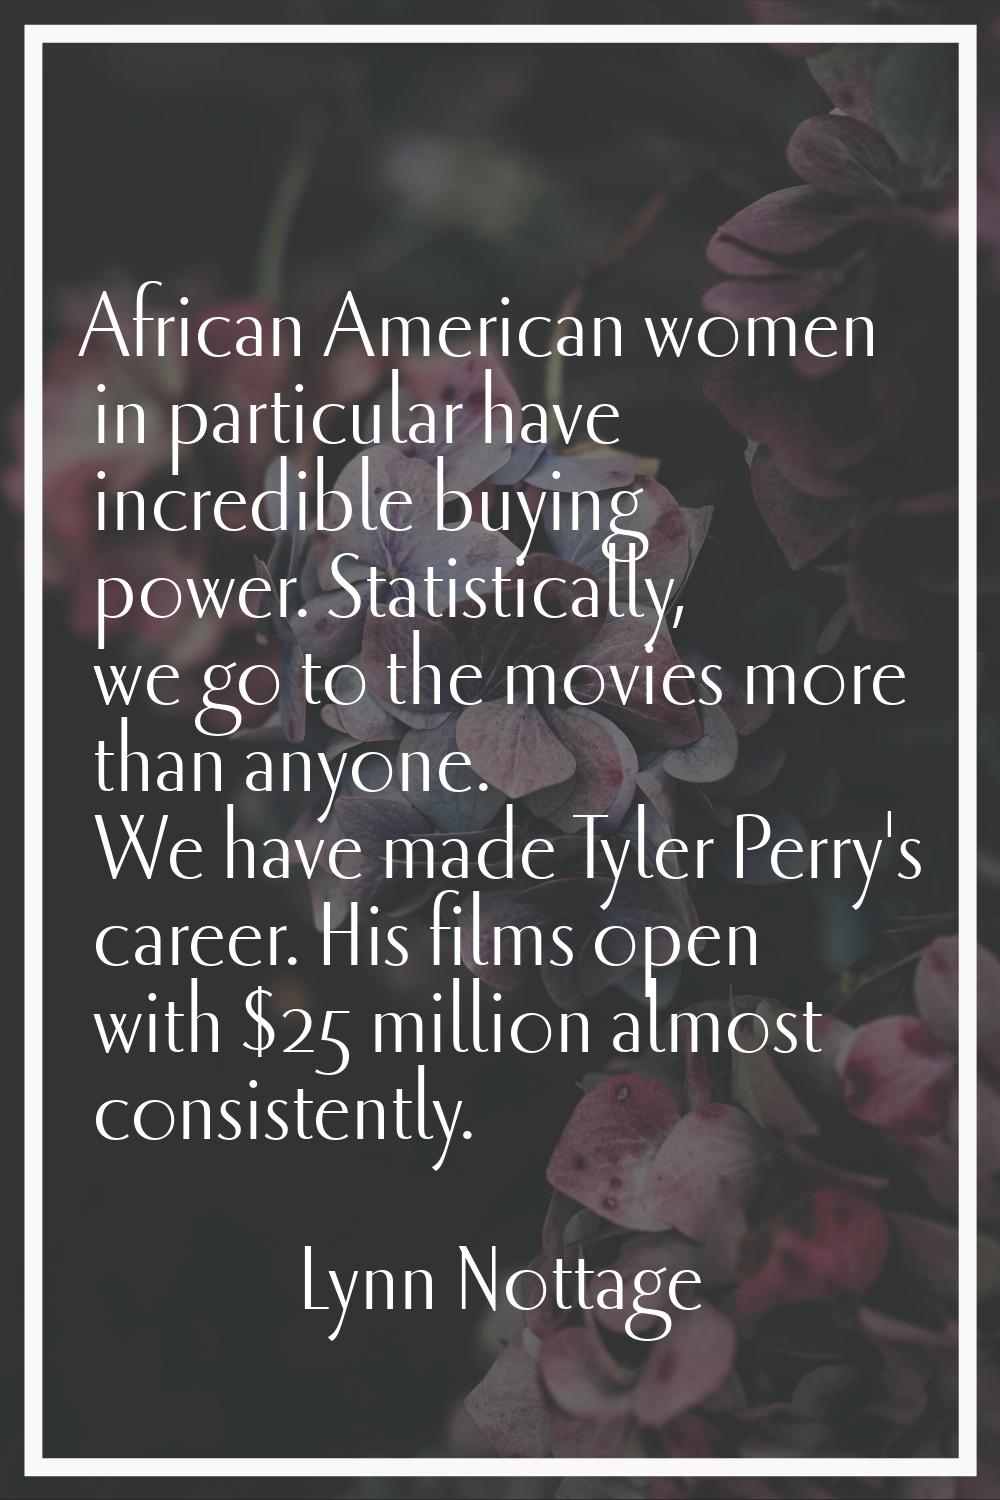 African American women in particular have incredible buying power. Statistically, we go to the movi